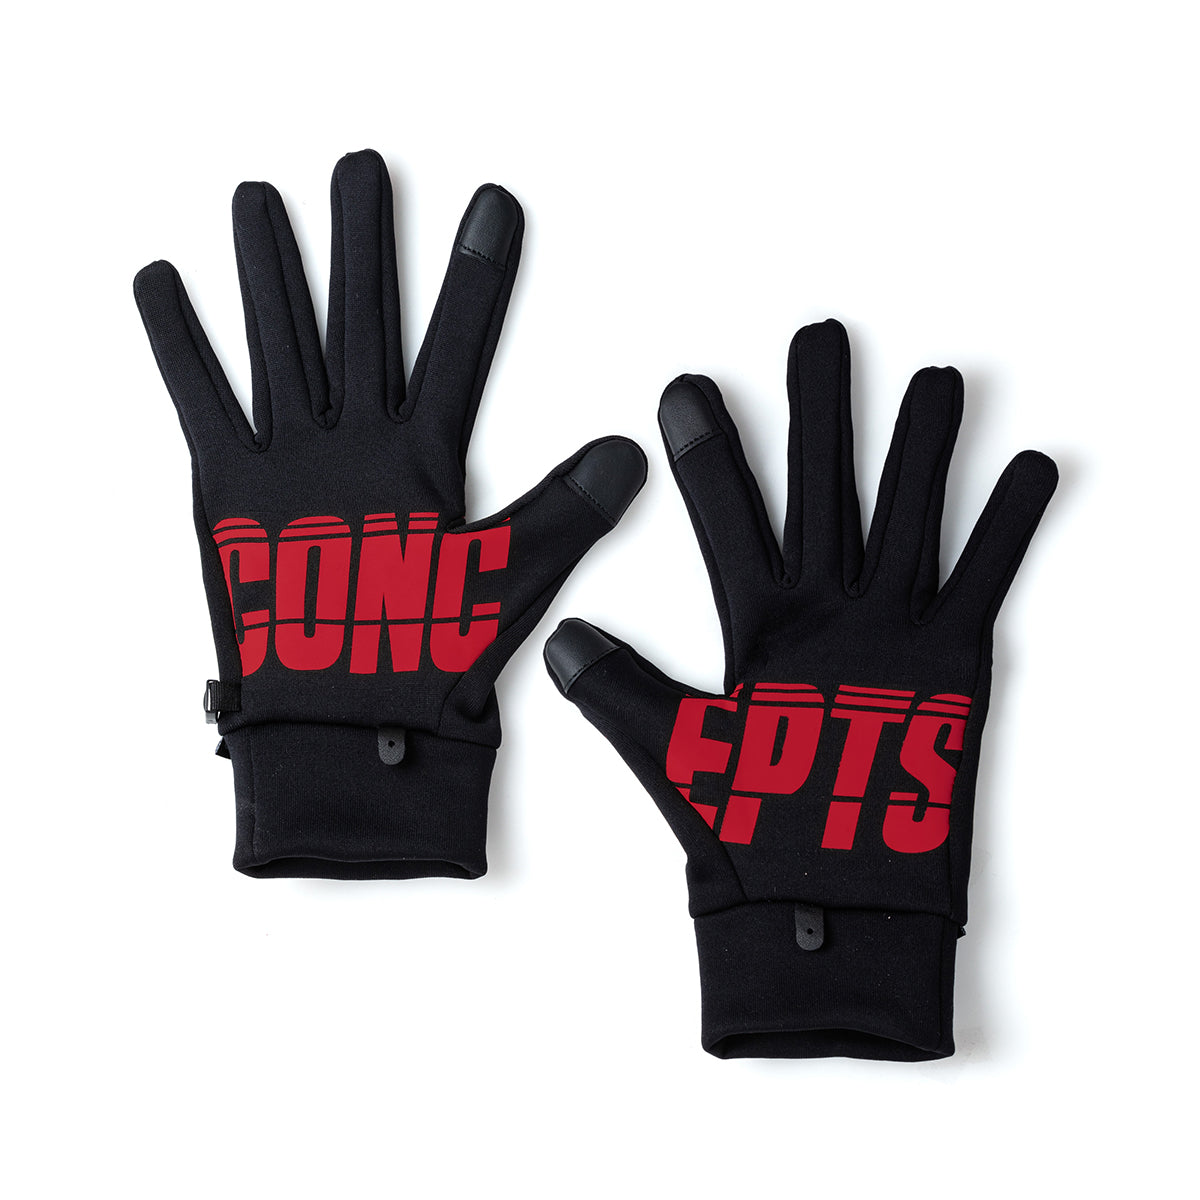 Concepts 3M Polartec Gloves (Red)